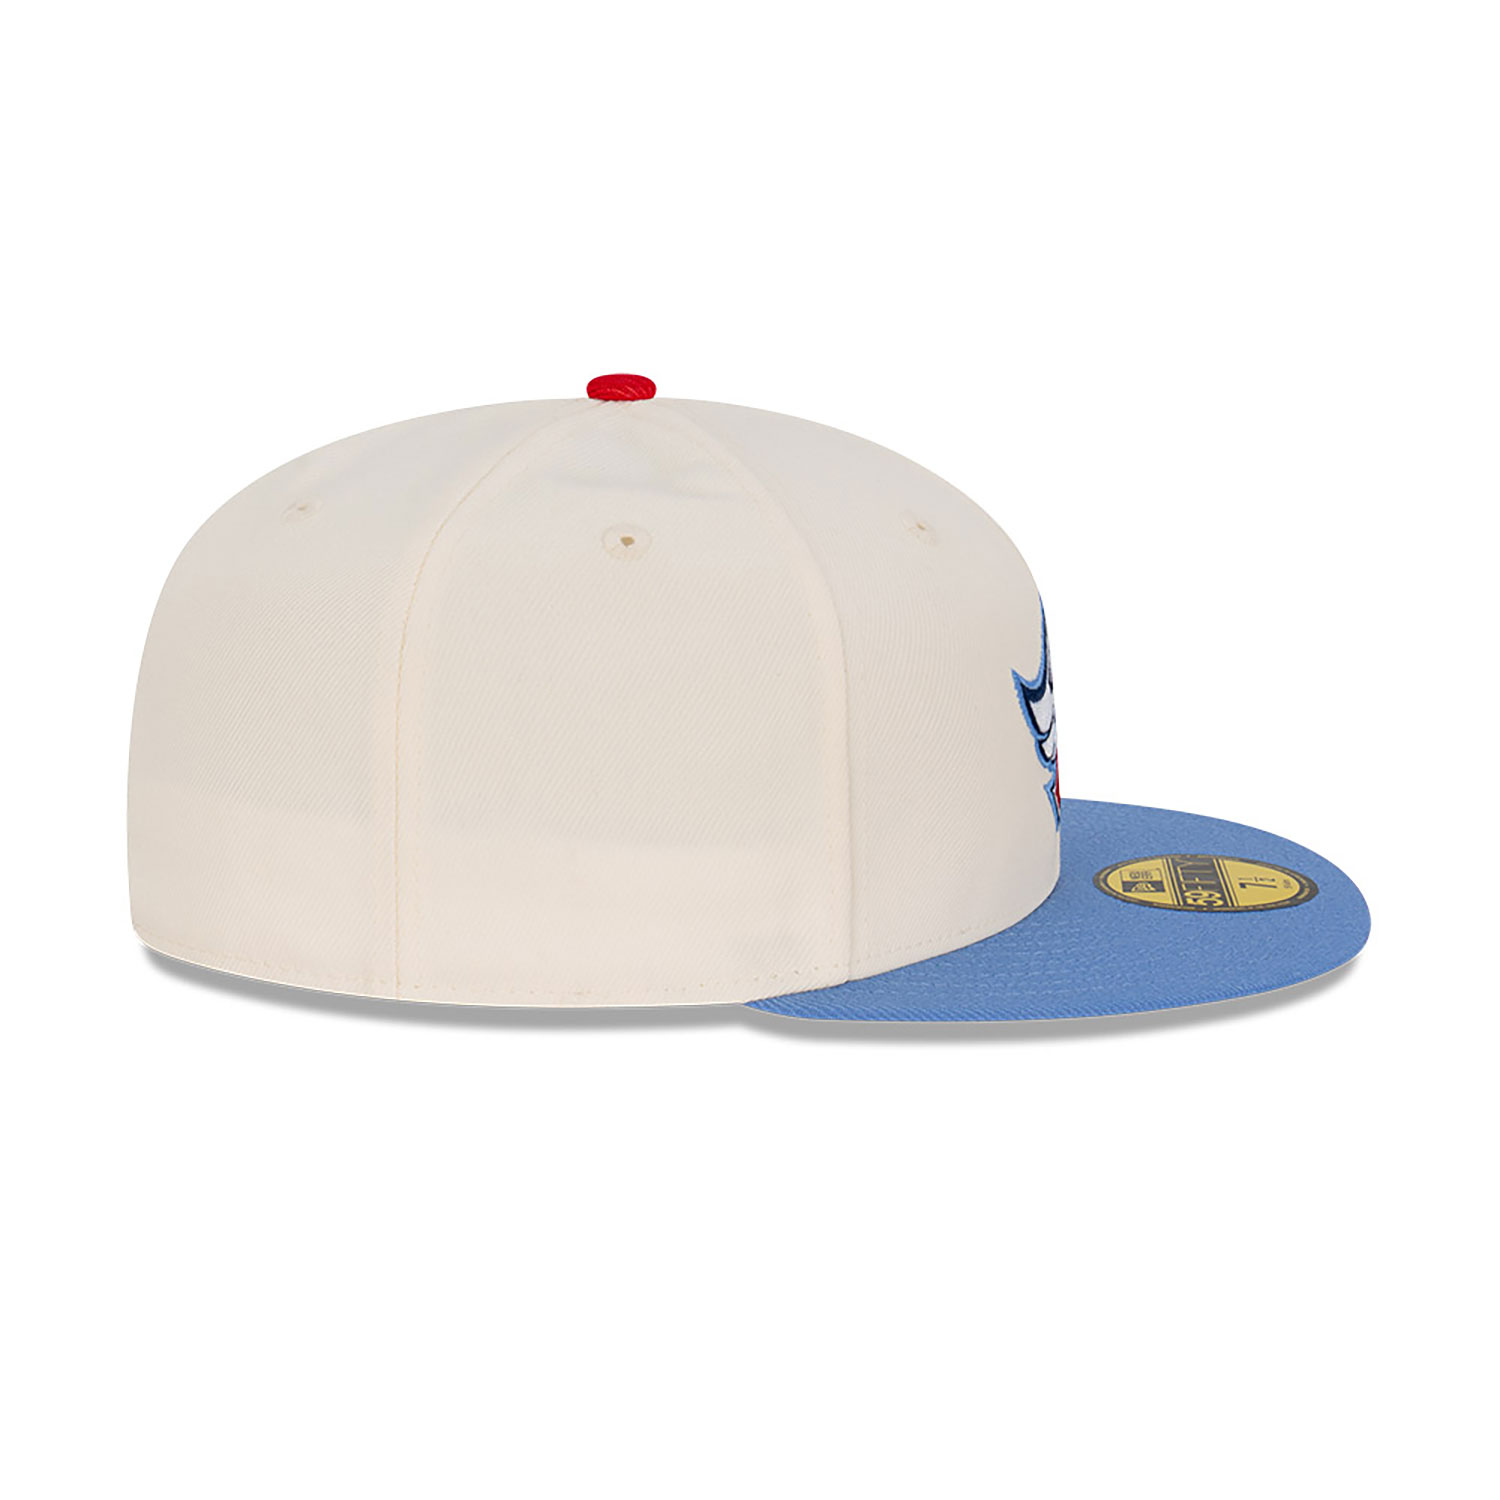 LA Angels Cooperstown Chrome White 59FIFTY Fitted Cap